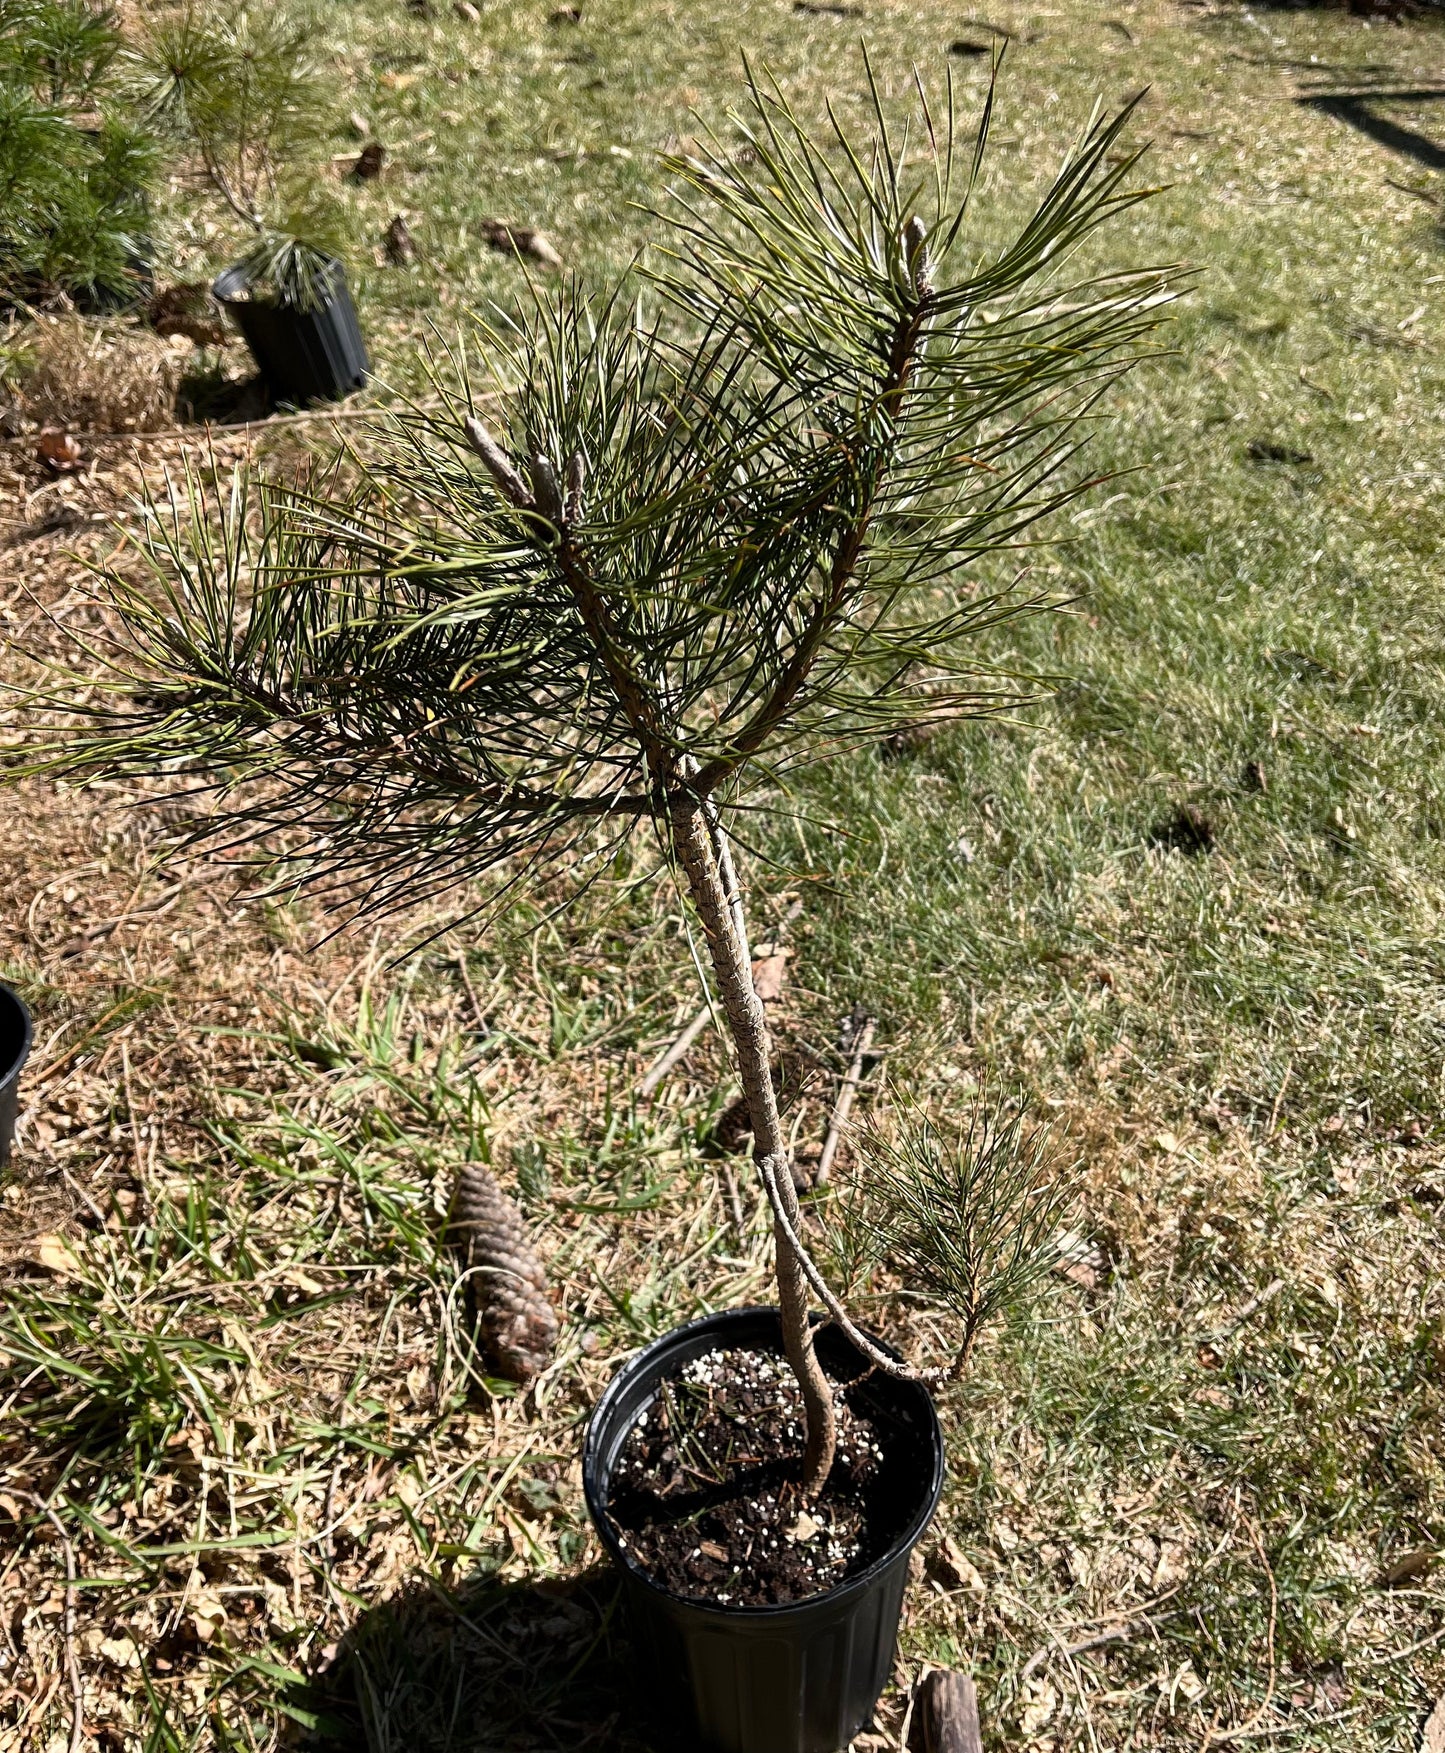 Table Mountain Pine Seedling - American Bonsai Tree - Extremely Rare - Long Living - Giant Silver Cones -  Grown from Seed